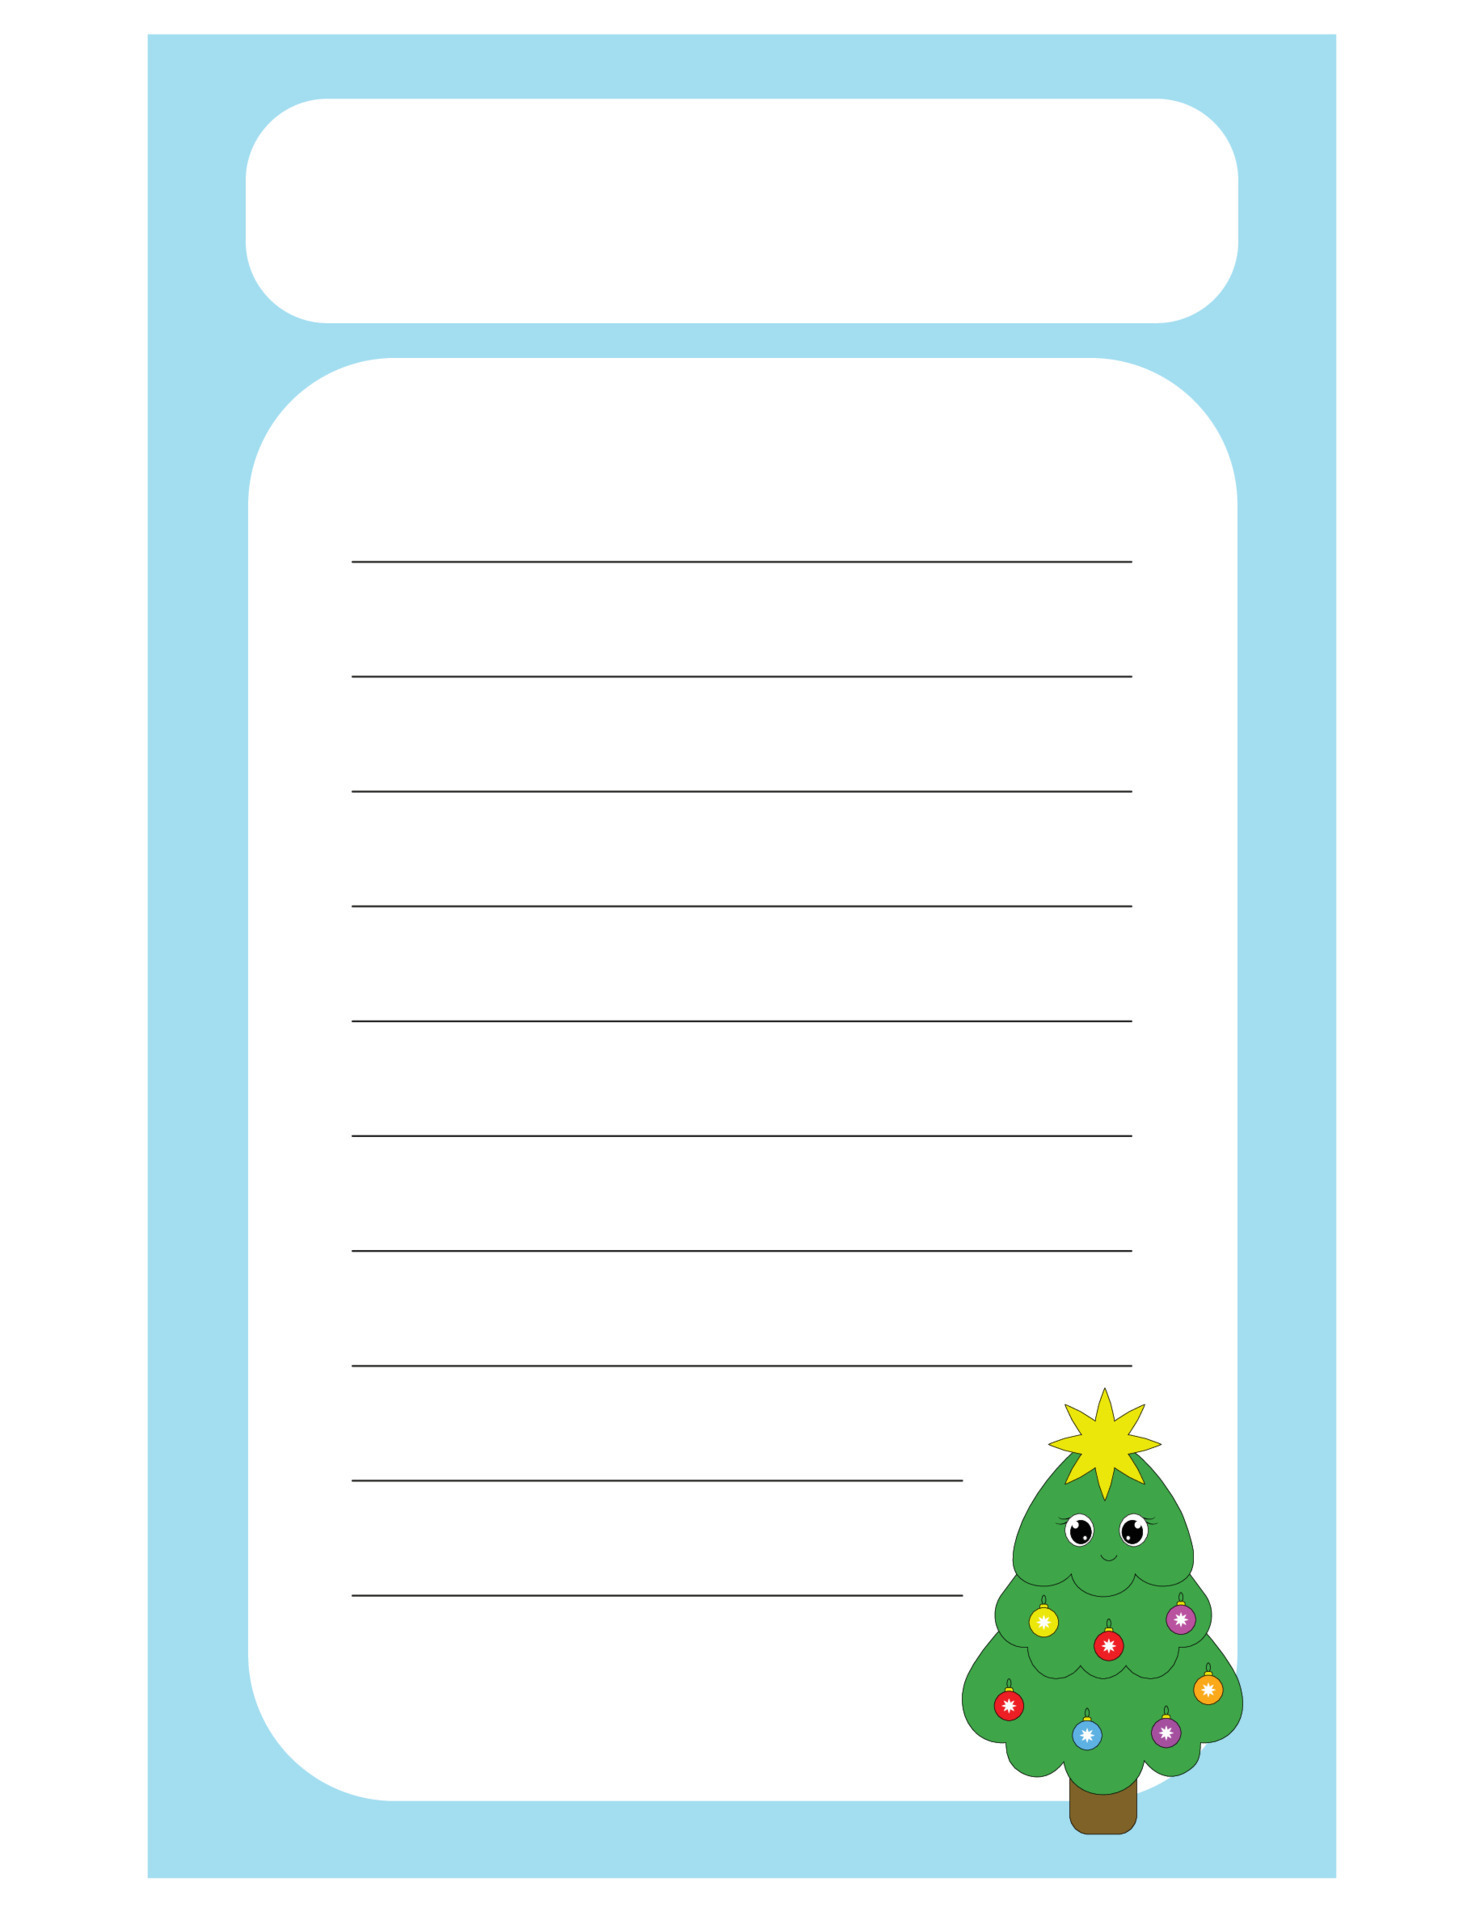 Christmas Writing Paper for Kids